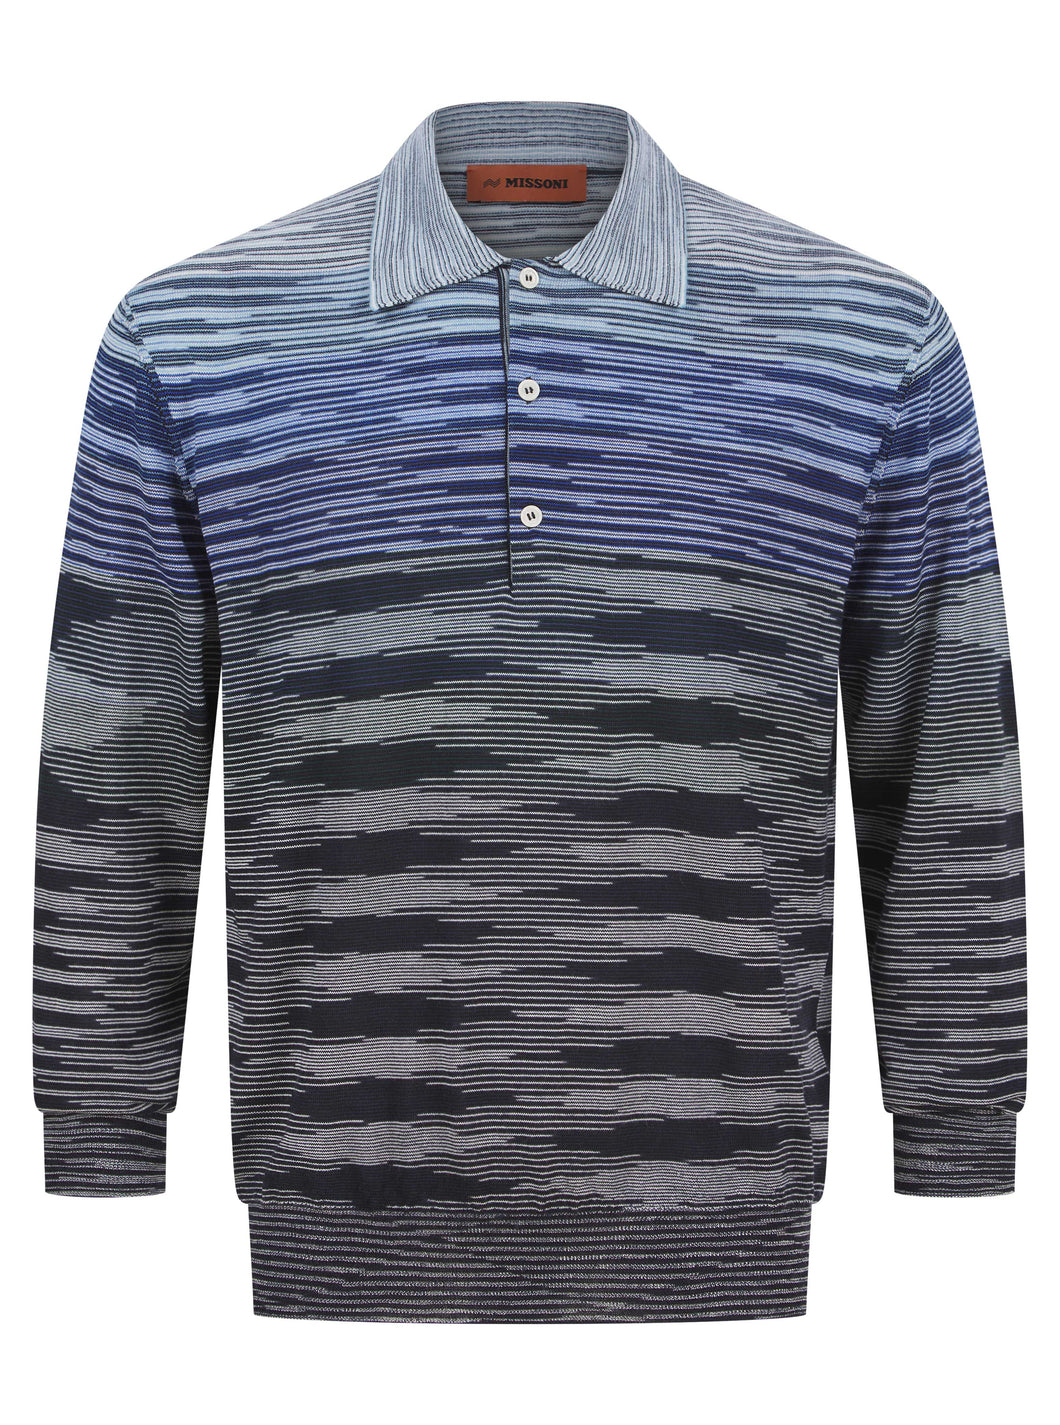 Missoni Knitted Polo Shirt Navy